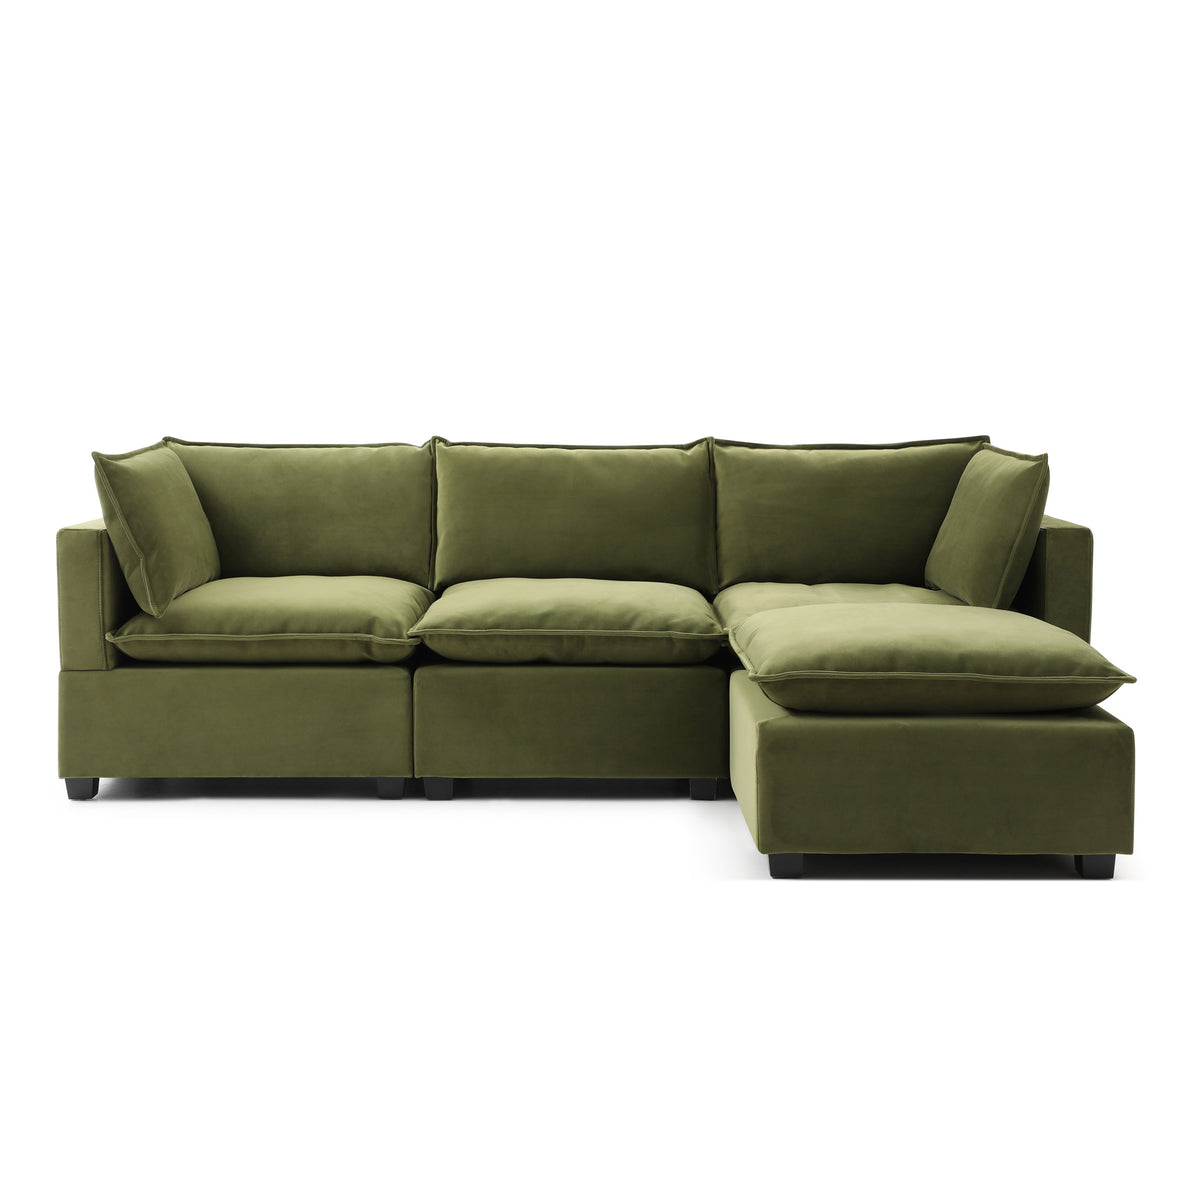 Theo Olive Green 3 Seater Velvet Chaise Sofa from Roseland Furniture